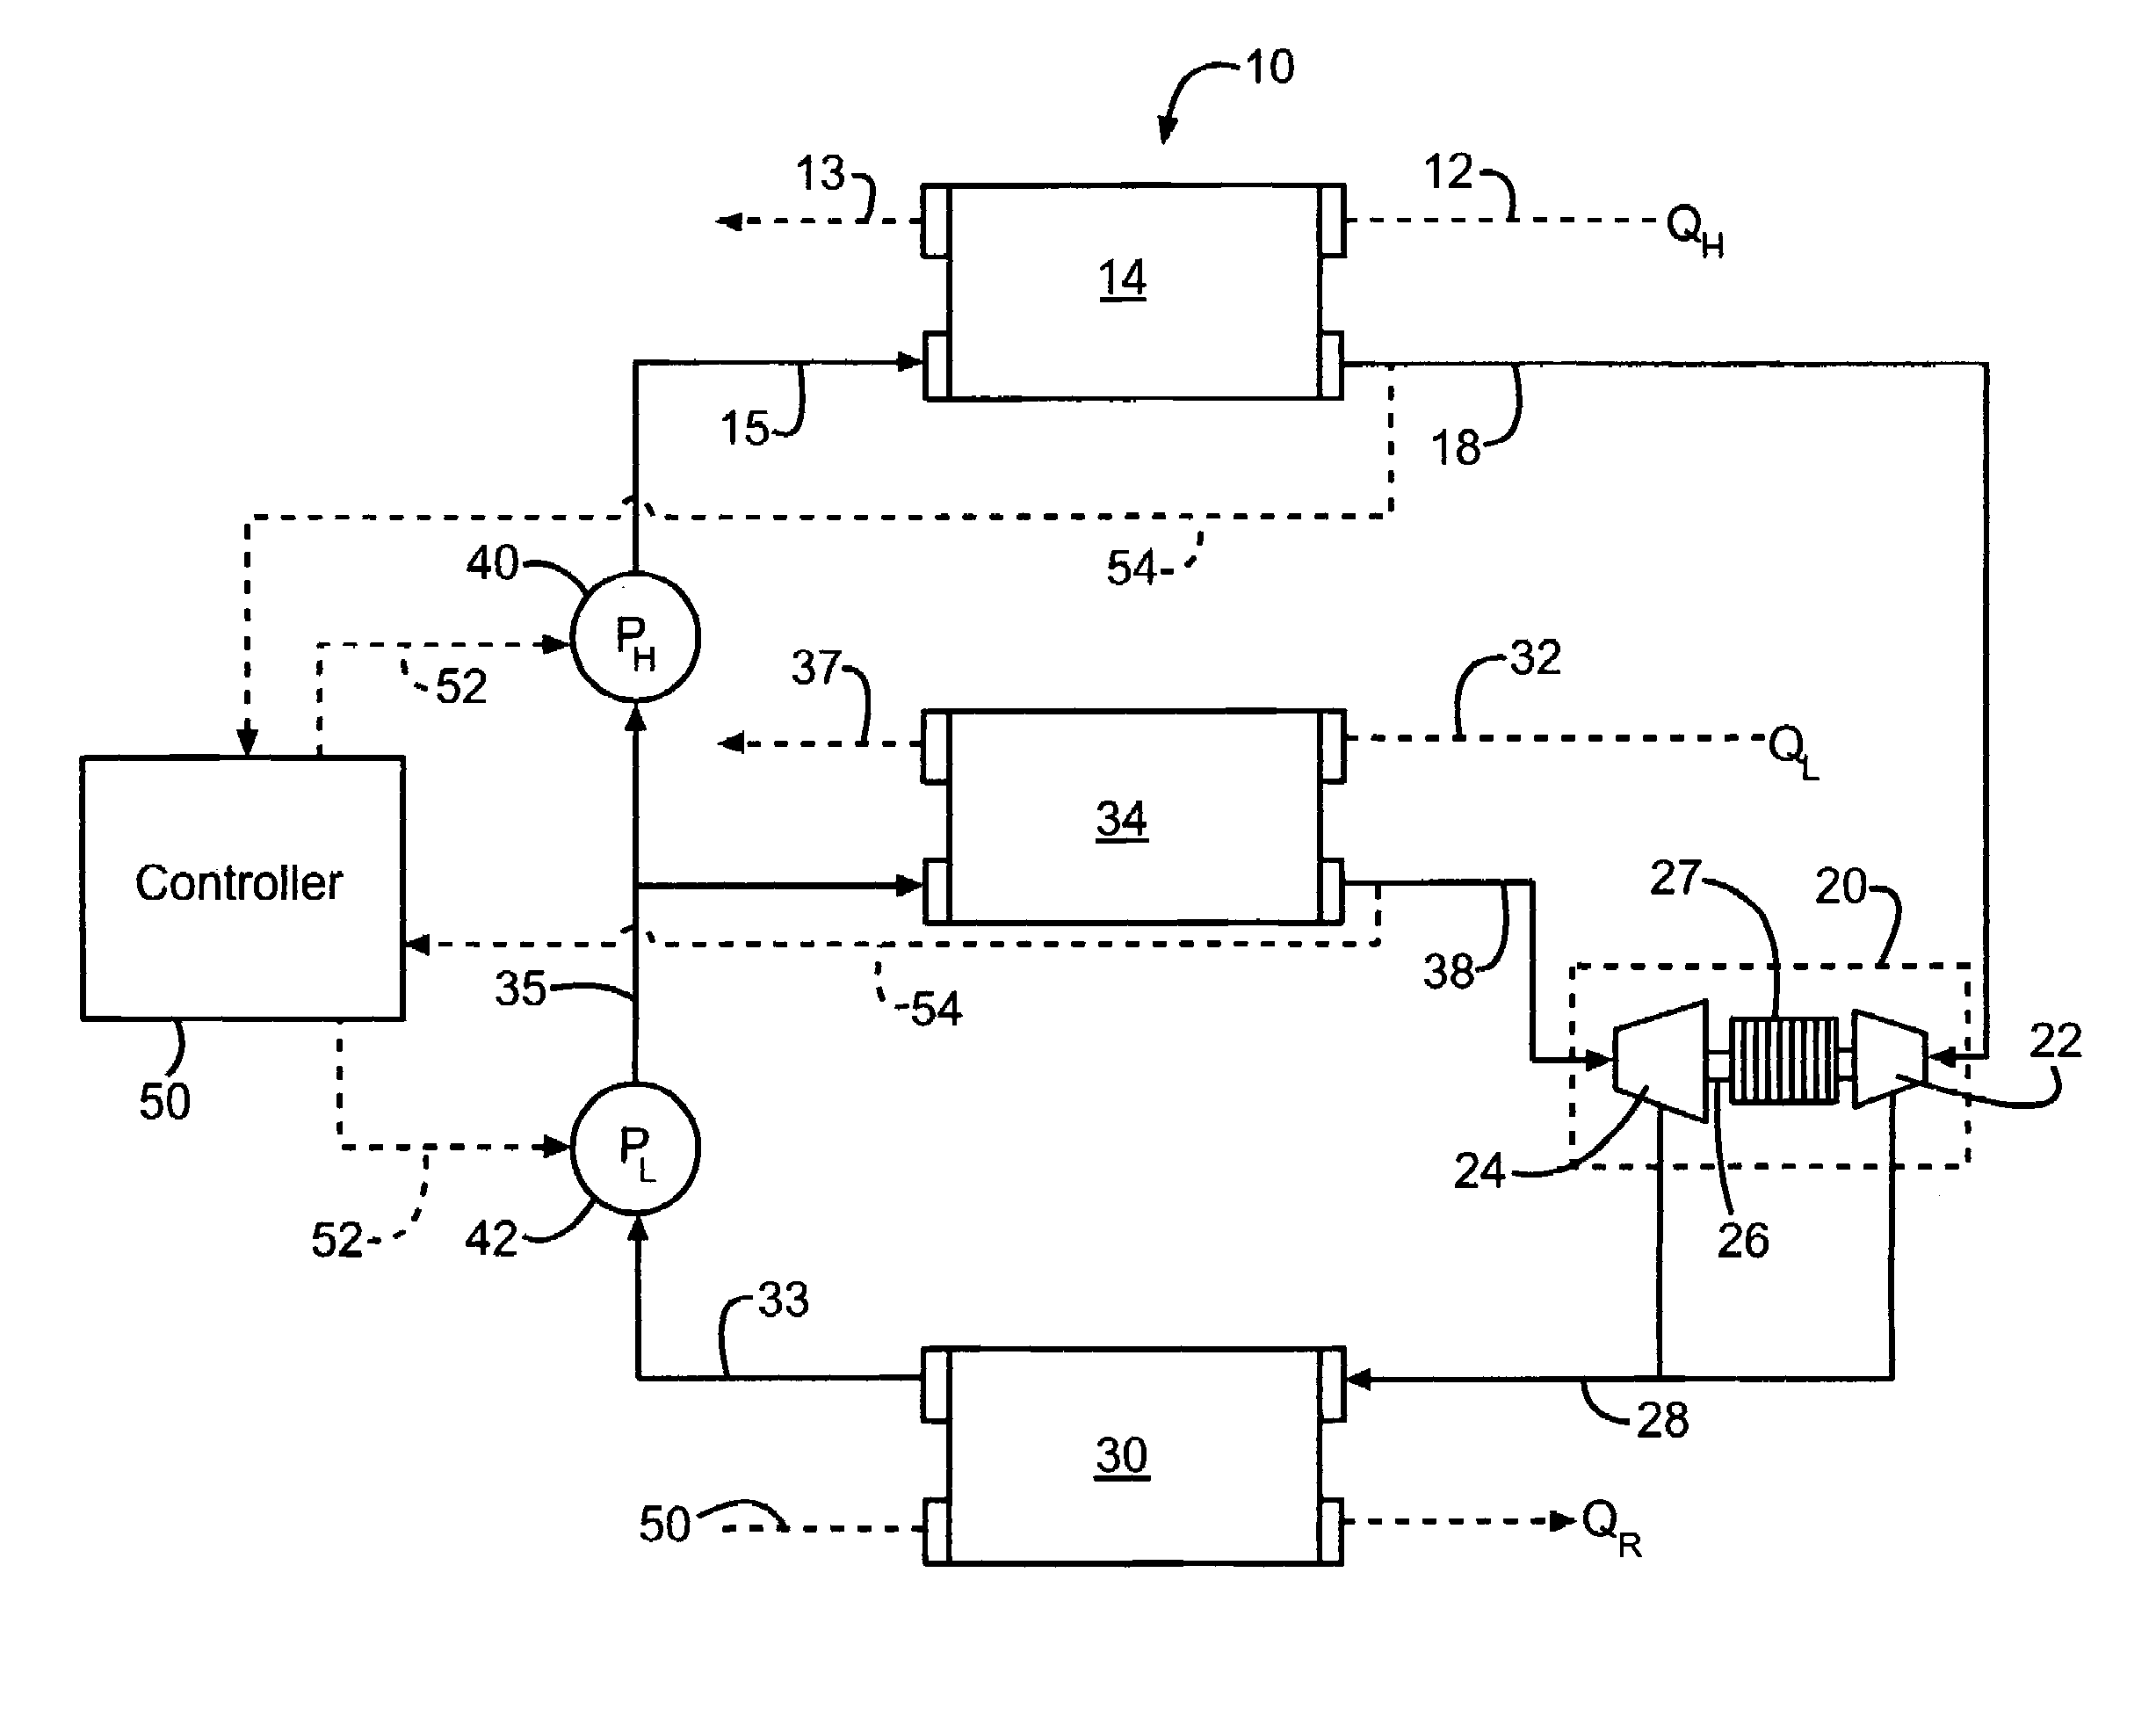 Energy recovery system using an organic rankine cycle